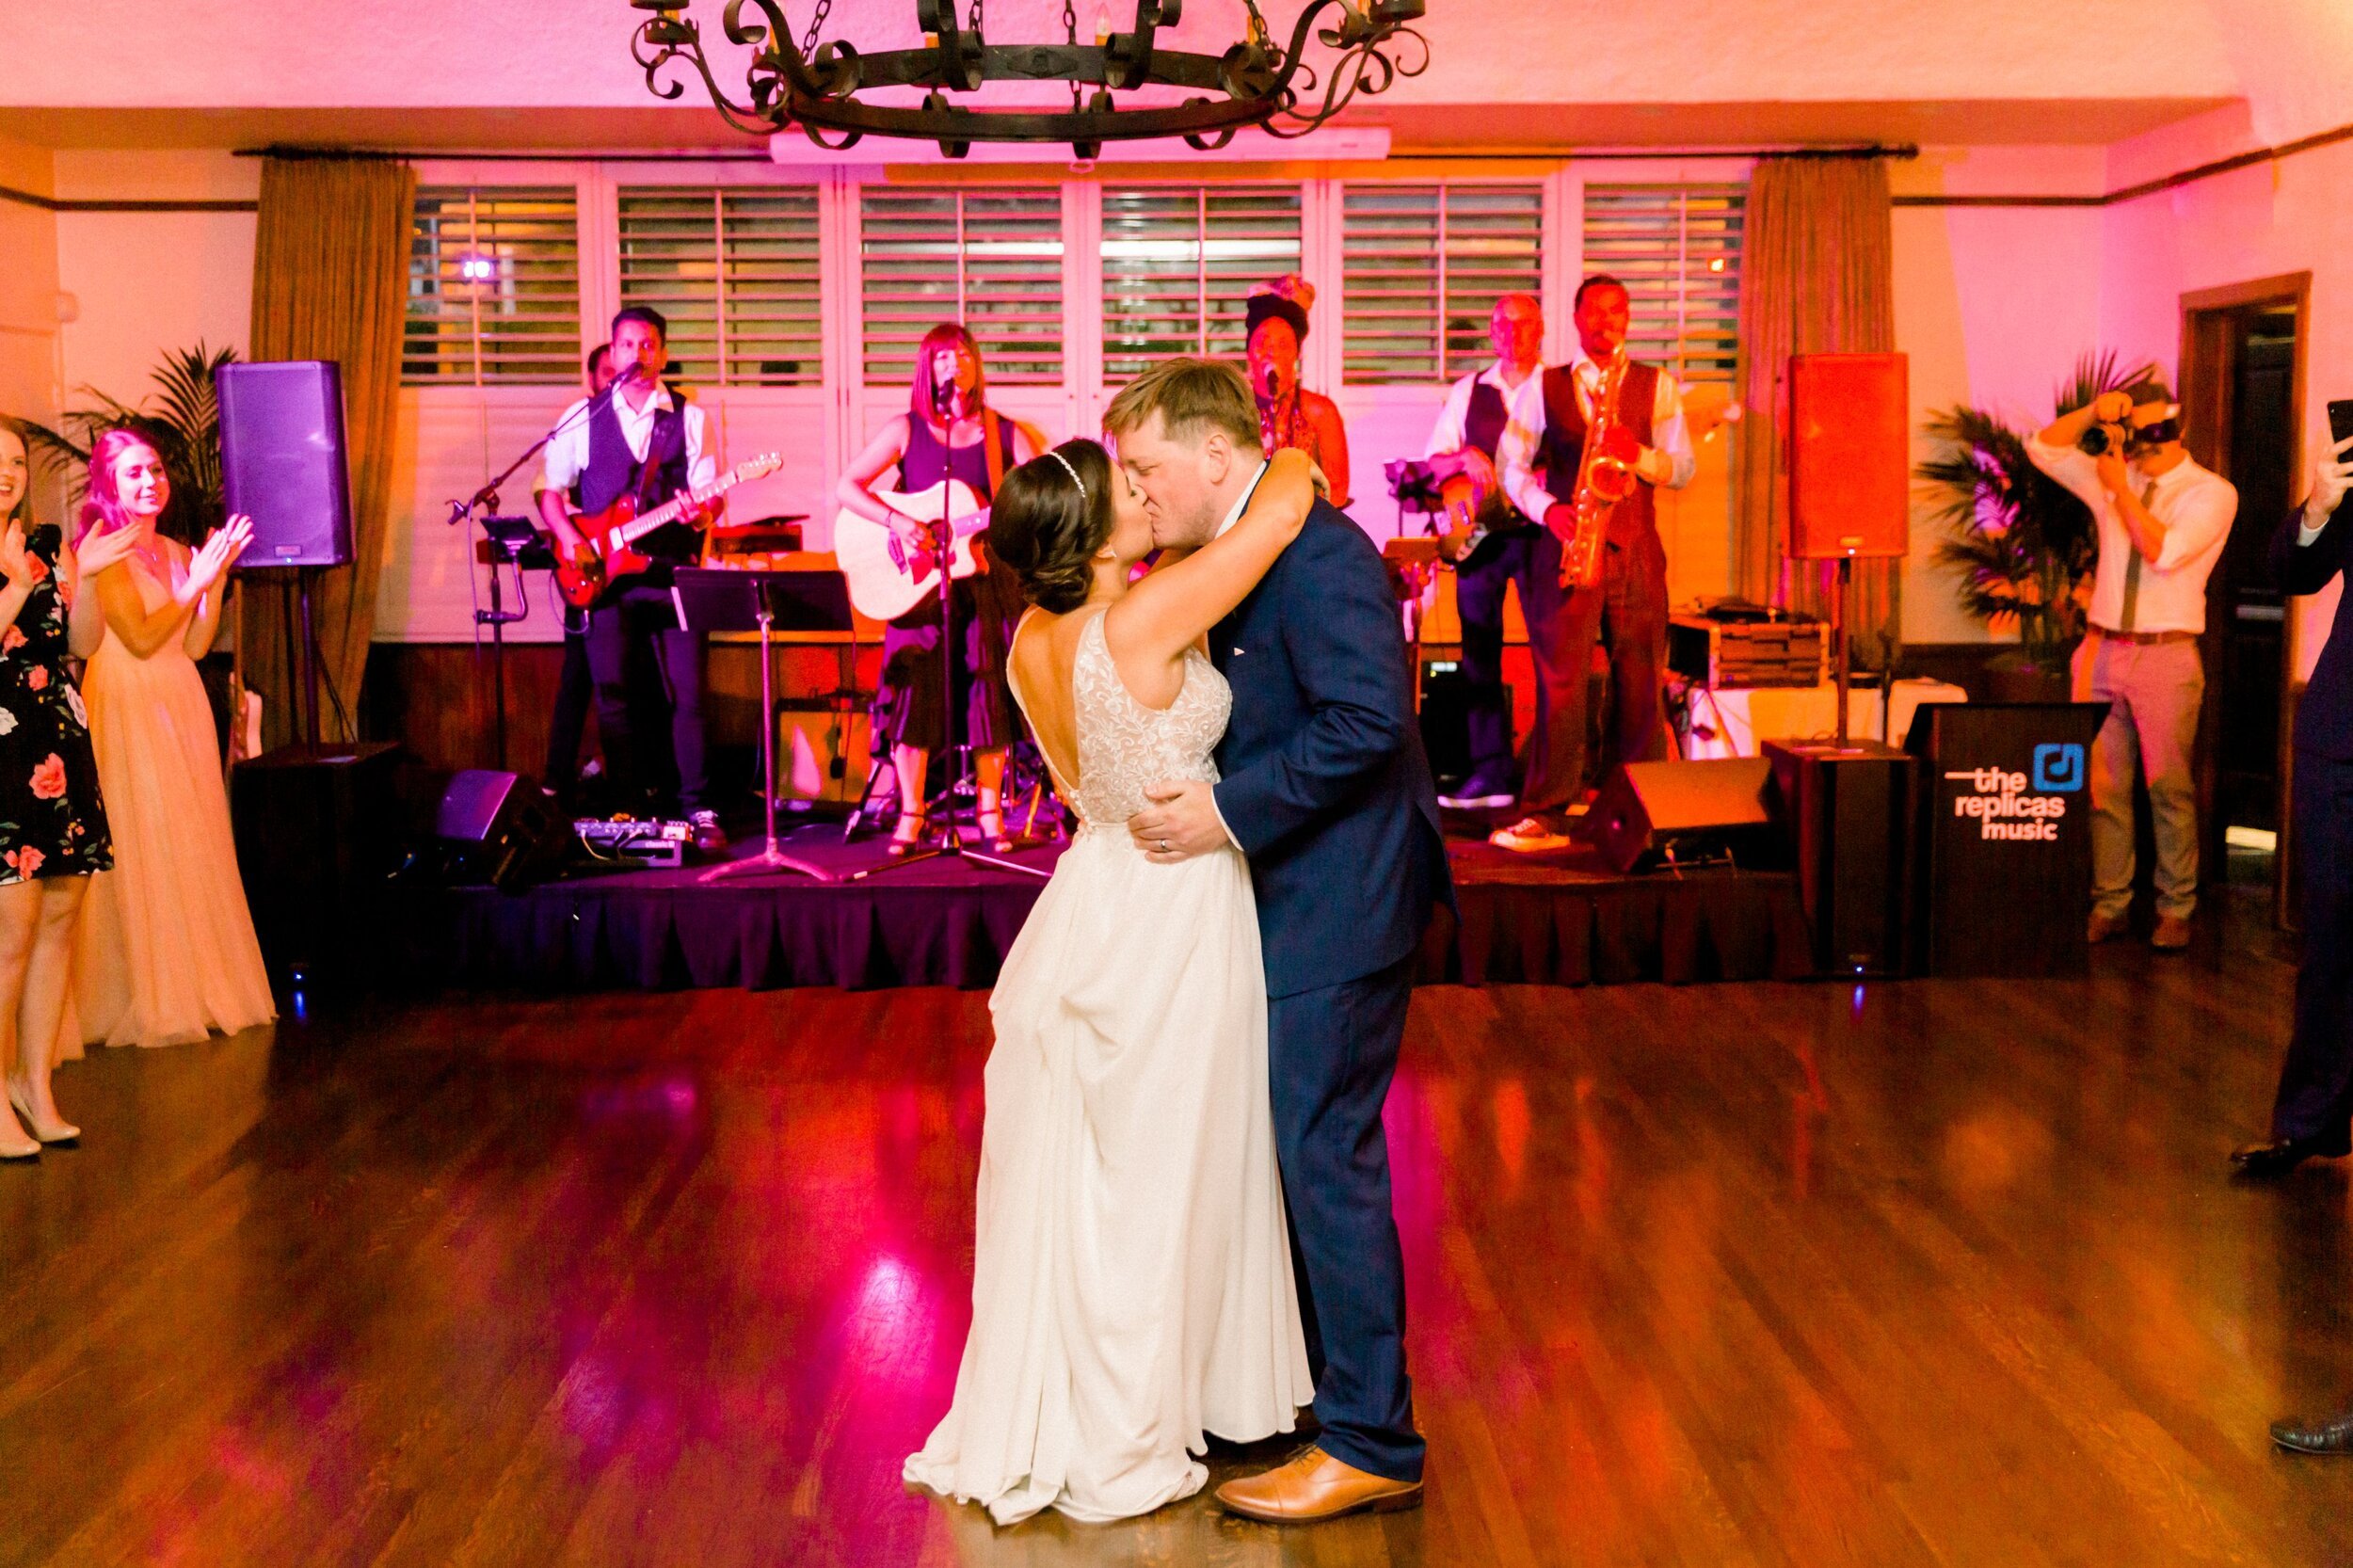 www.santabarbarawedding.com | James &amp; Jess | KB Events | Riviera Mansion | Ella &amp; Louie | The Replicas Music | SPARK Creative Events | Jenny Yoo | Bride and Groom Share a Dance